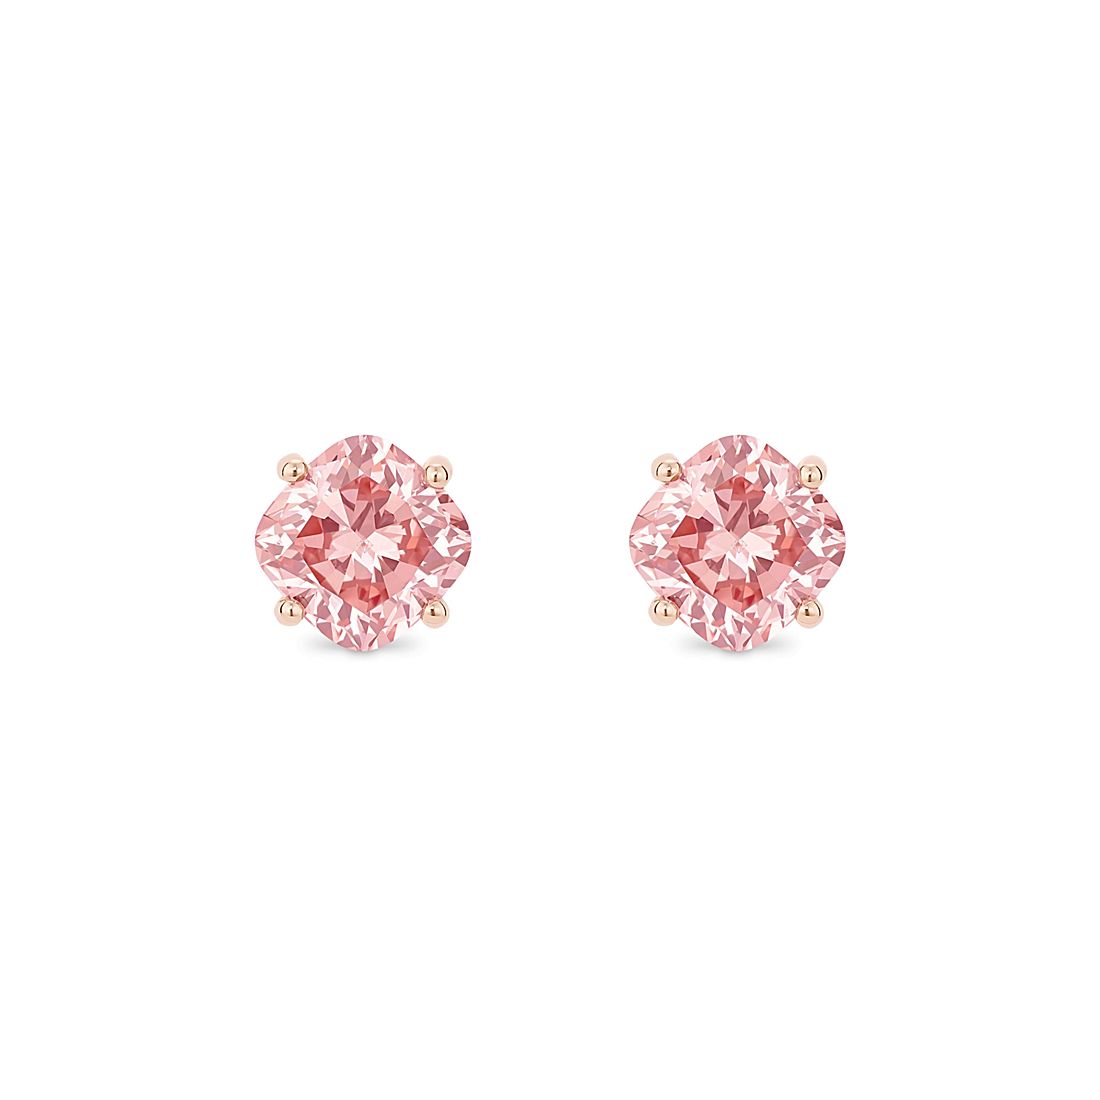 LIGHTBOX Lab-Grown Pink Diamond Cushion Solitaire Stud Earrings in 14k Rose Gold (1 1/2 ct. tw.)